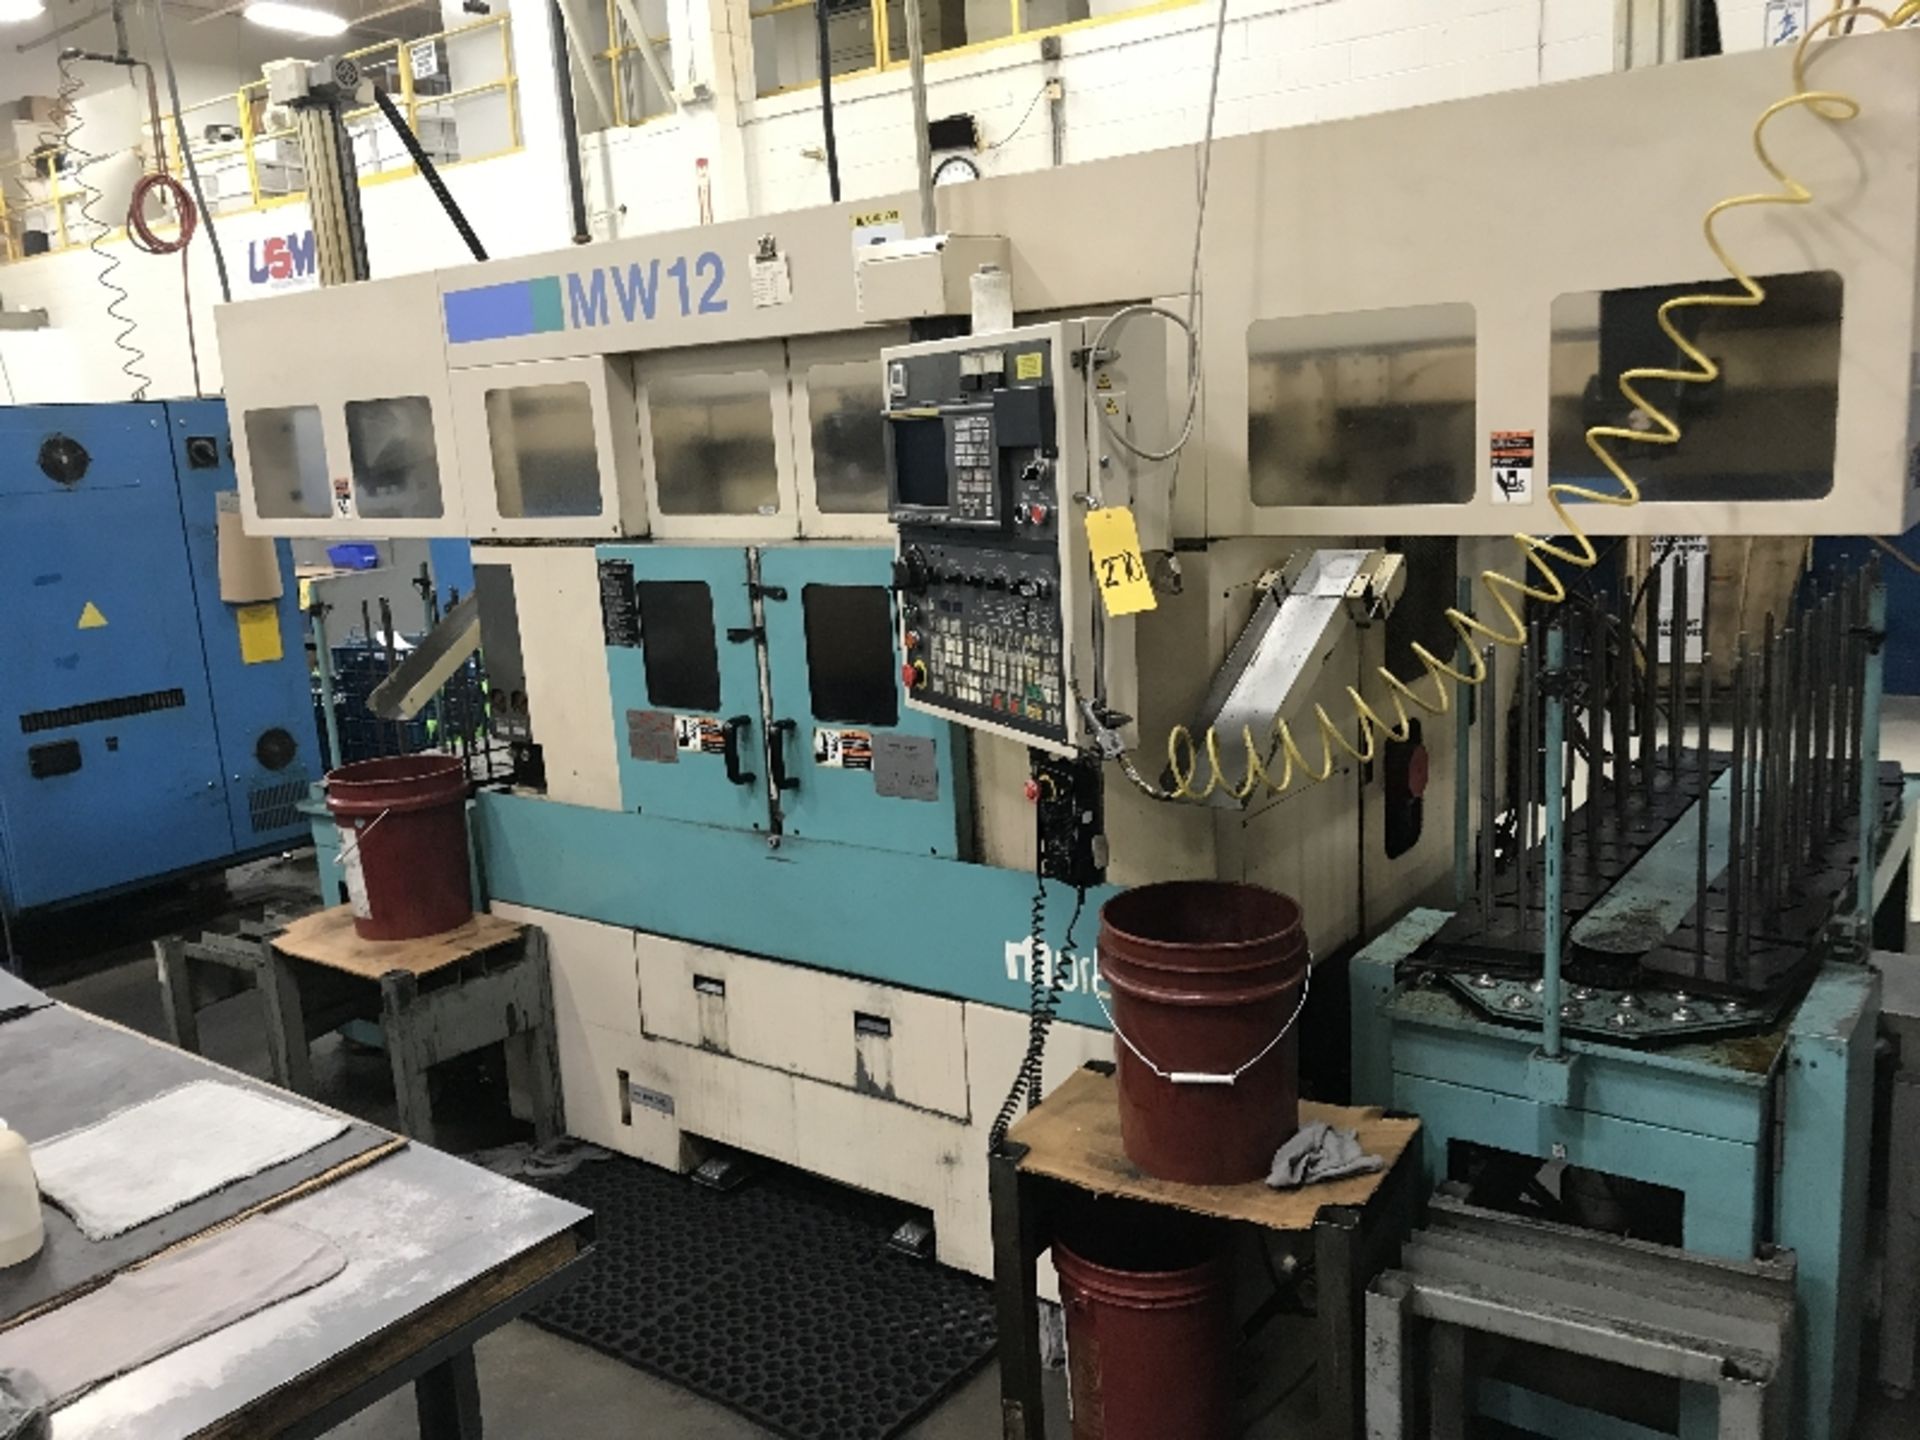 Murata Model: MW12, Twin Spindle Lath, SN: 9KX83843301, (1998), Equipped with Dual Pick & Place